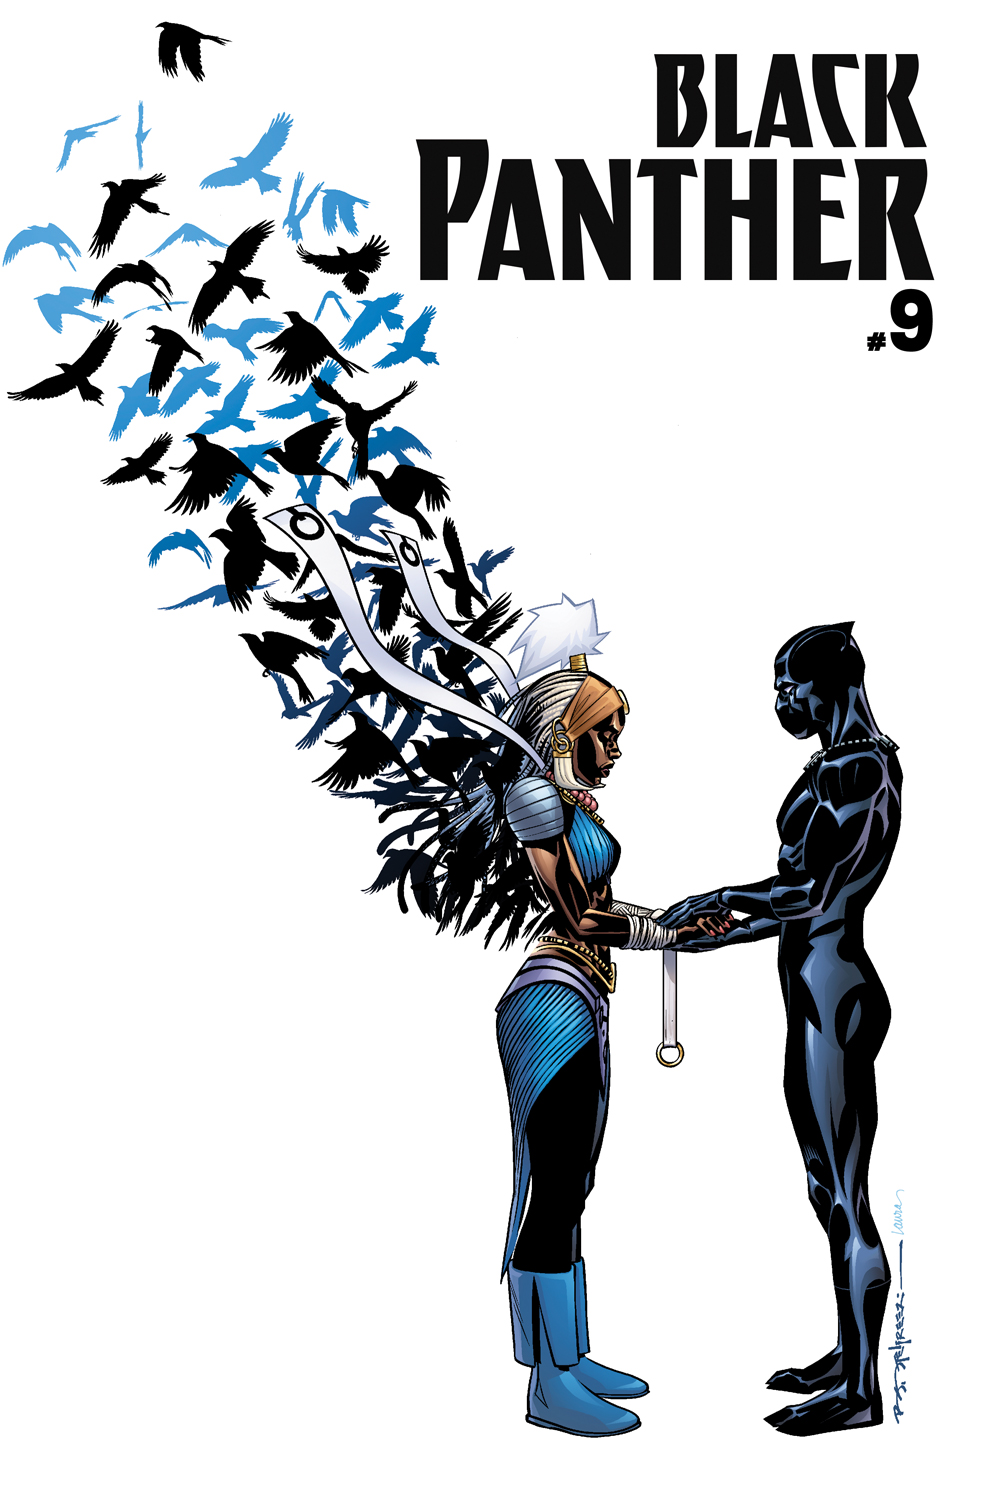 MARVEL COMICS PROUDLY PRESENTS “BLACK PANTHER: A NATION UNDER OUR FEET – PART EIGHT”